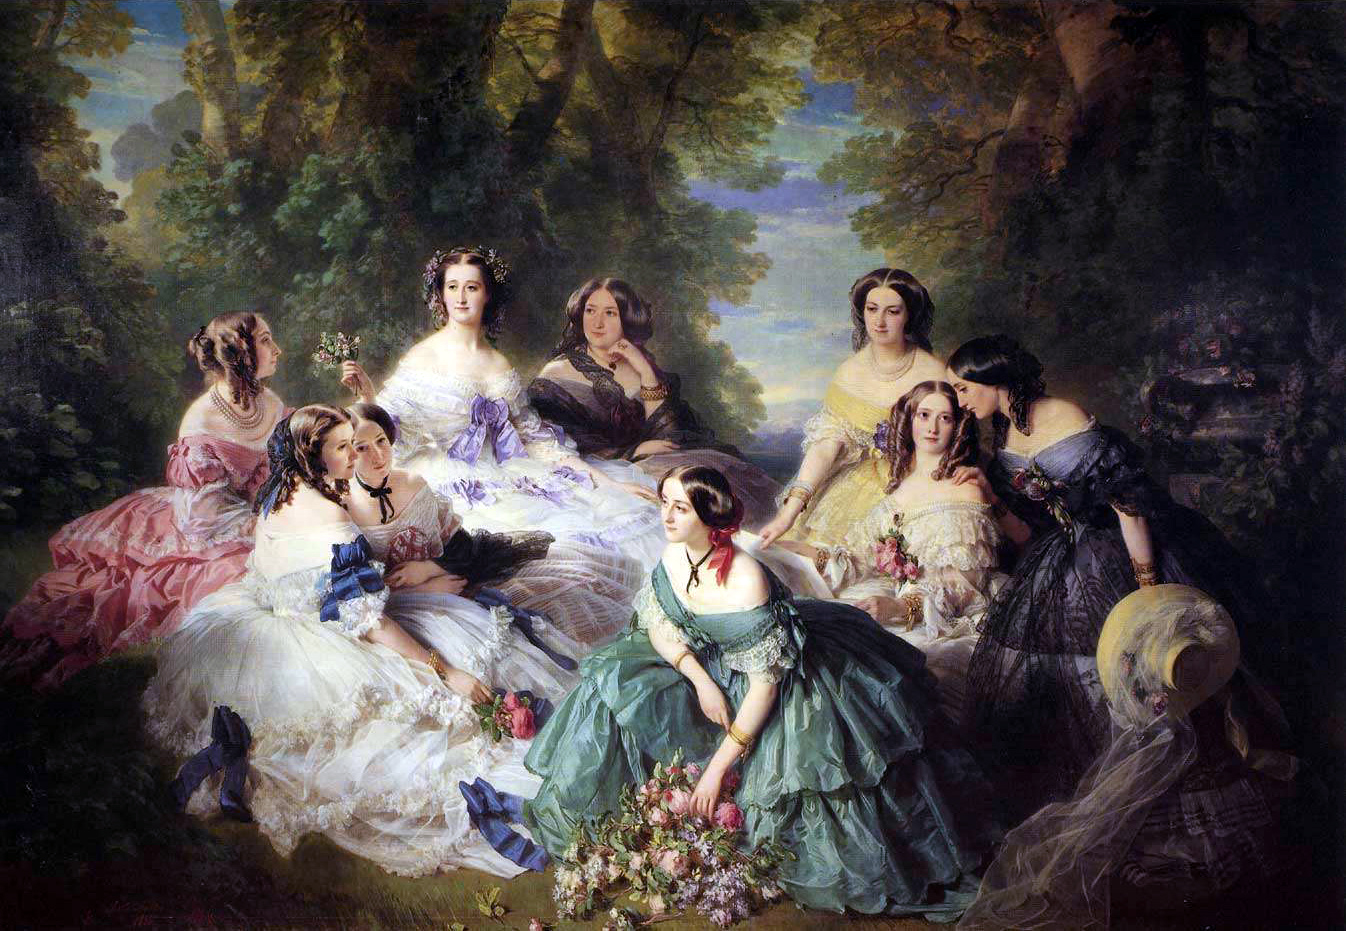 Fashion and Politics in Franz Xaver Winterhalters Portrait of The Empress Eugénie surrounded by her Ladies-in-Waiting